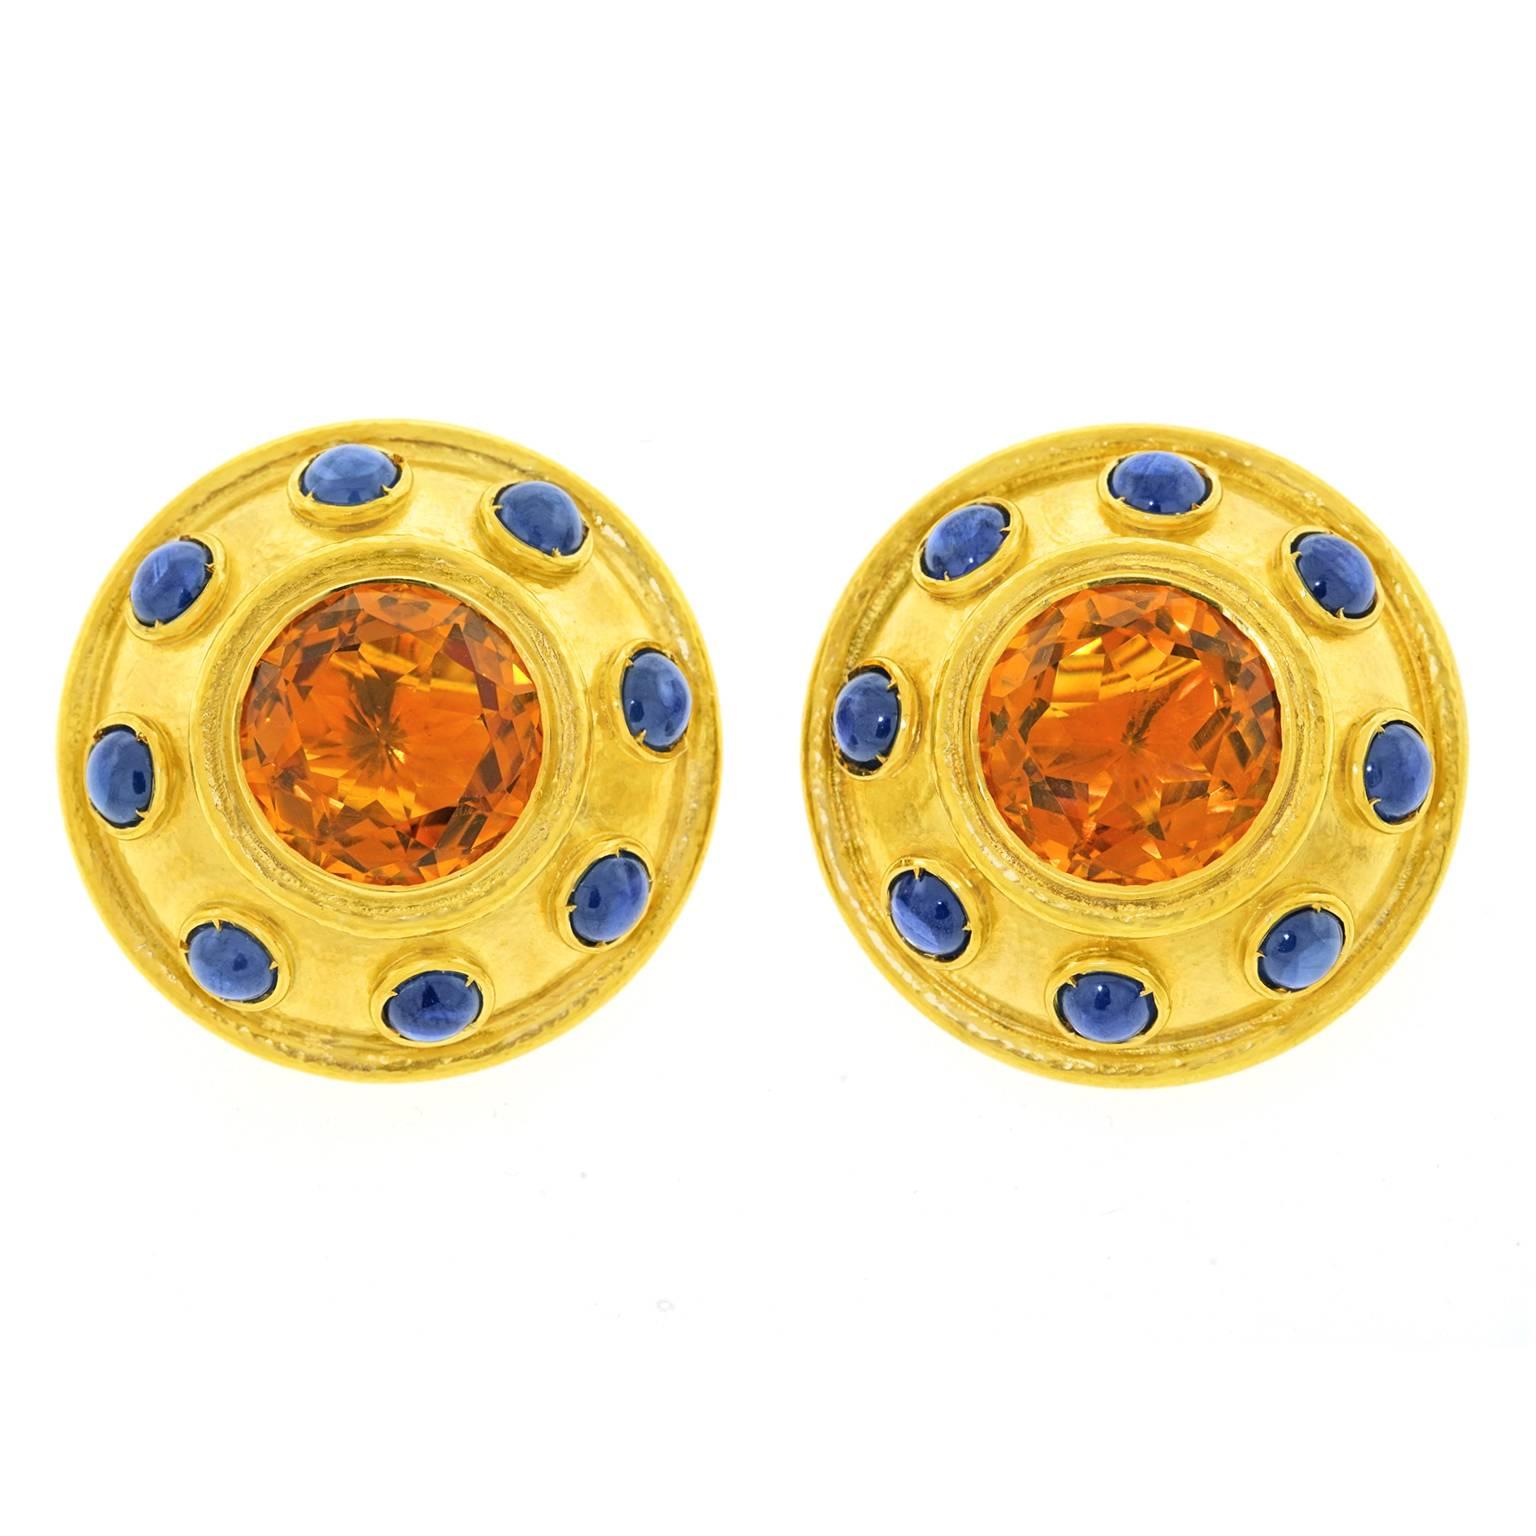 Circa 1980s, 22k, Zolotas, Greece.  These stunning classical motif shield earrings by Zolotas of Athens combine spectacular citrines with 12.0 carats of vivid blue sapphire. The graphic look of contrasting stones set in warm twenty-two-karat gold is